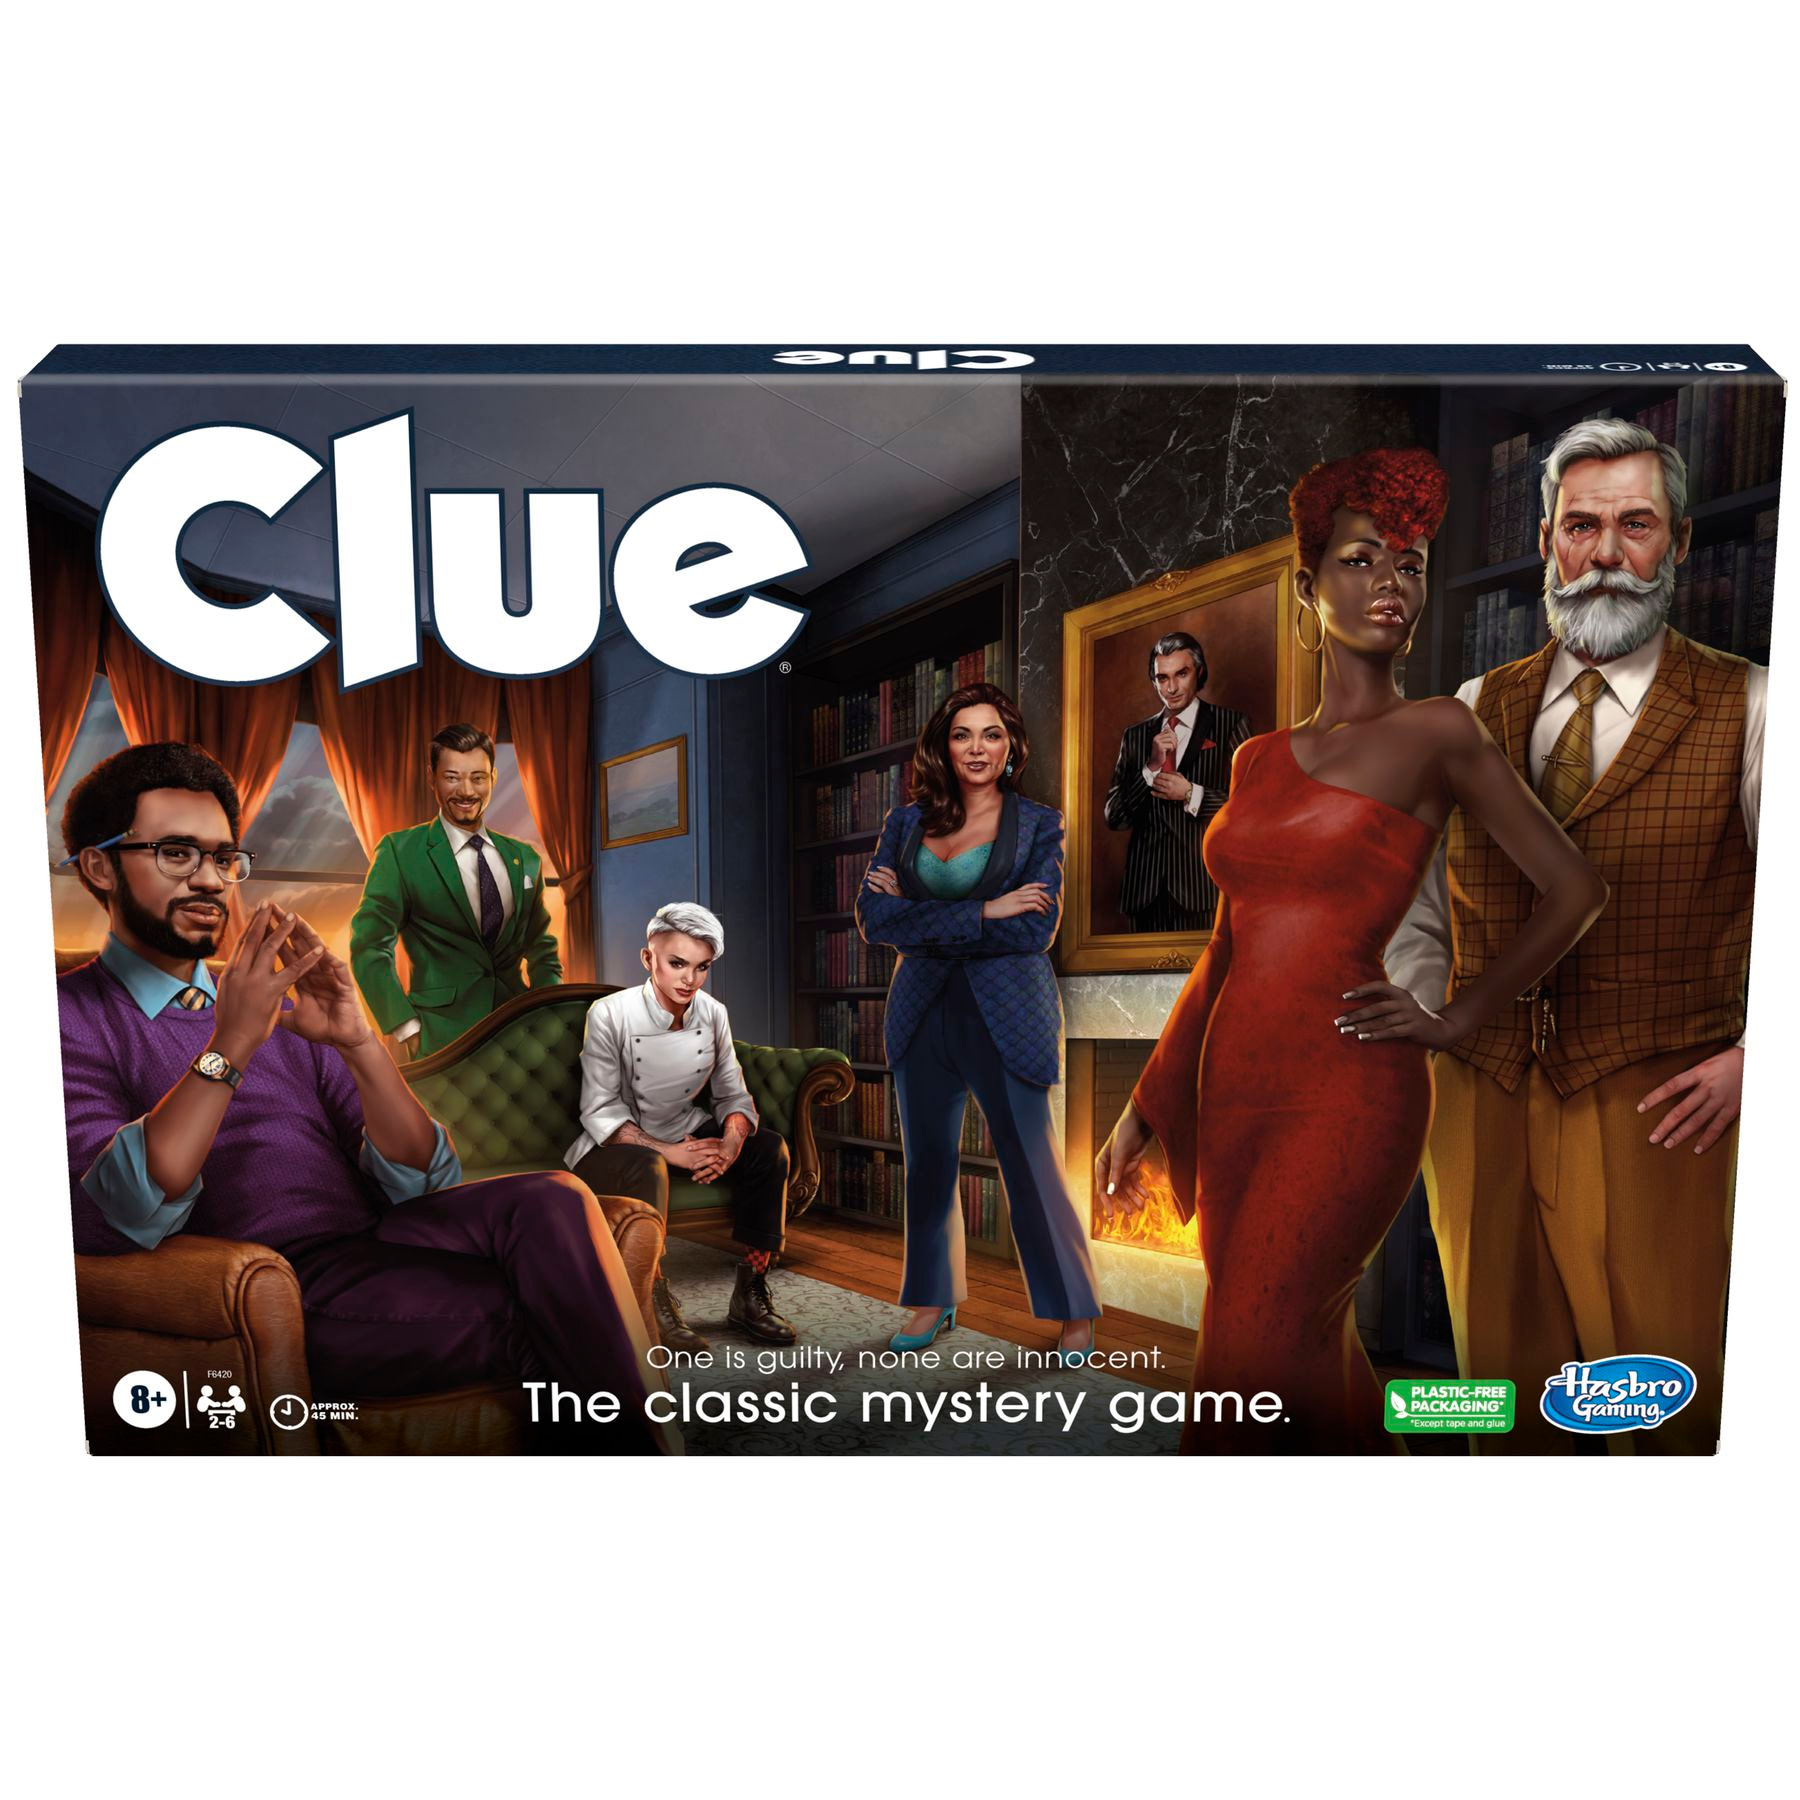 Clue has a new look for a new generation of board game fans — and it goes on sale today